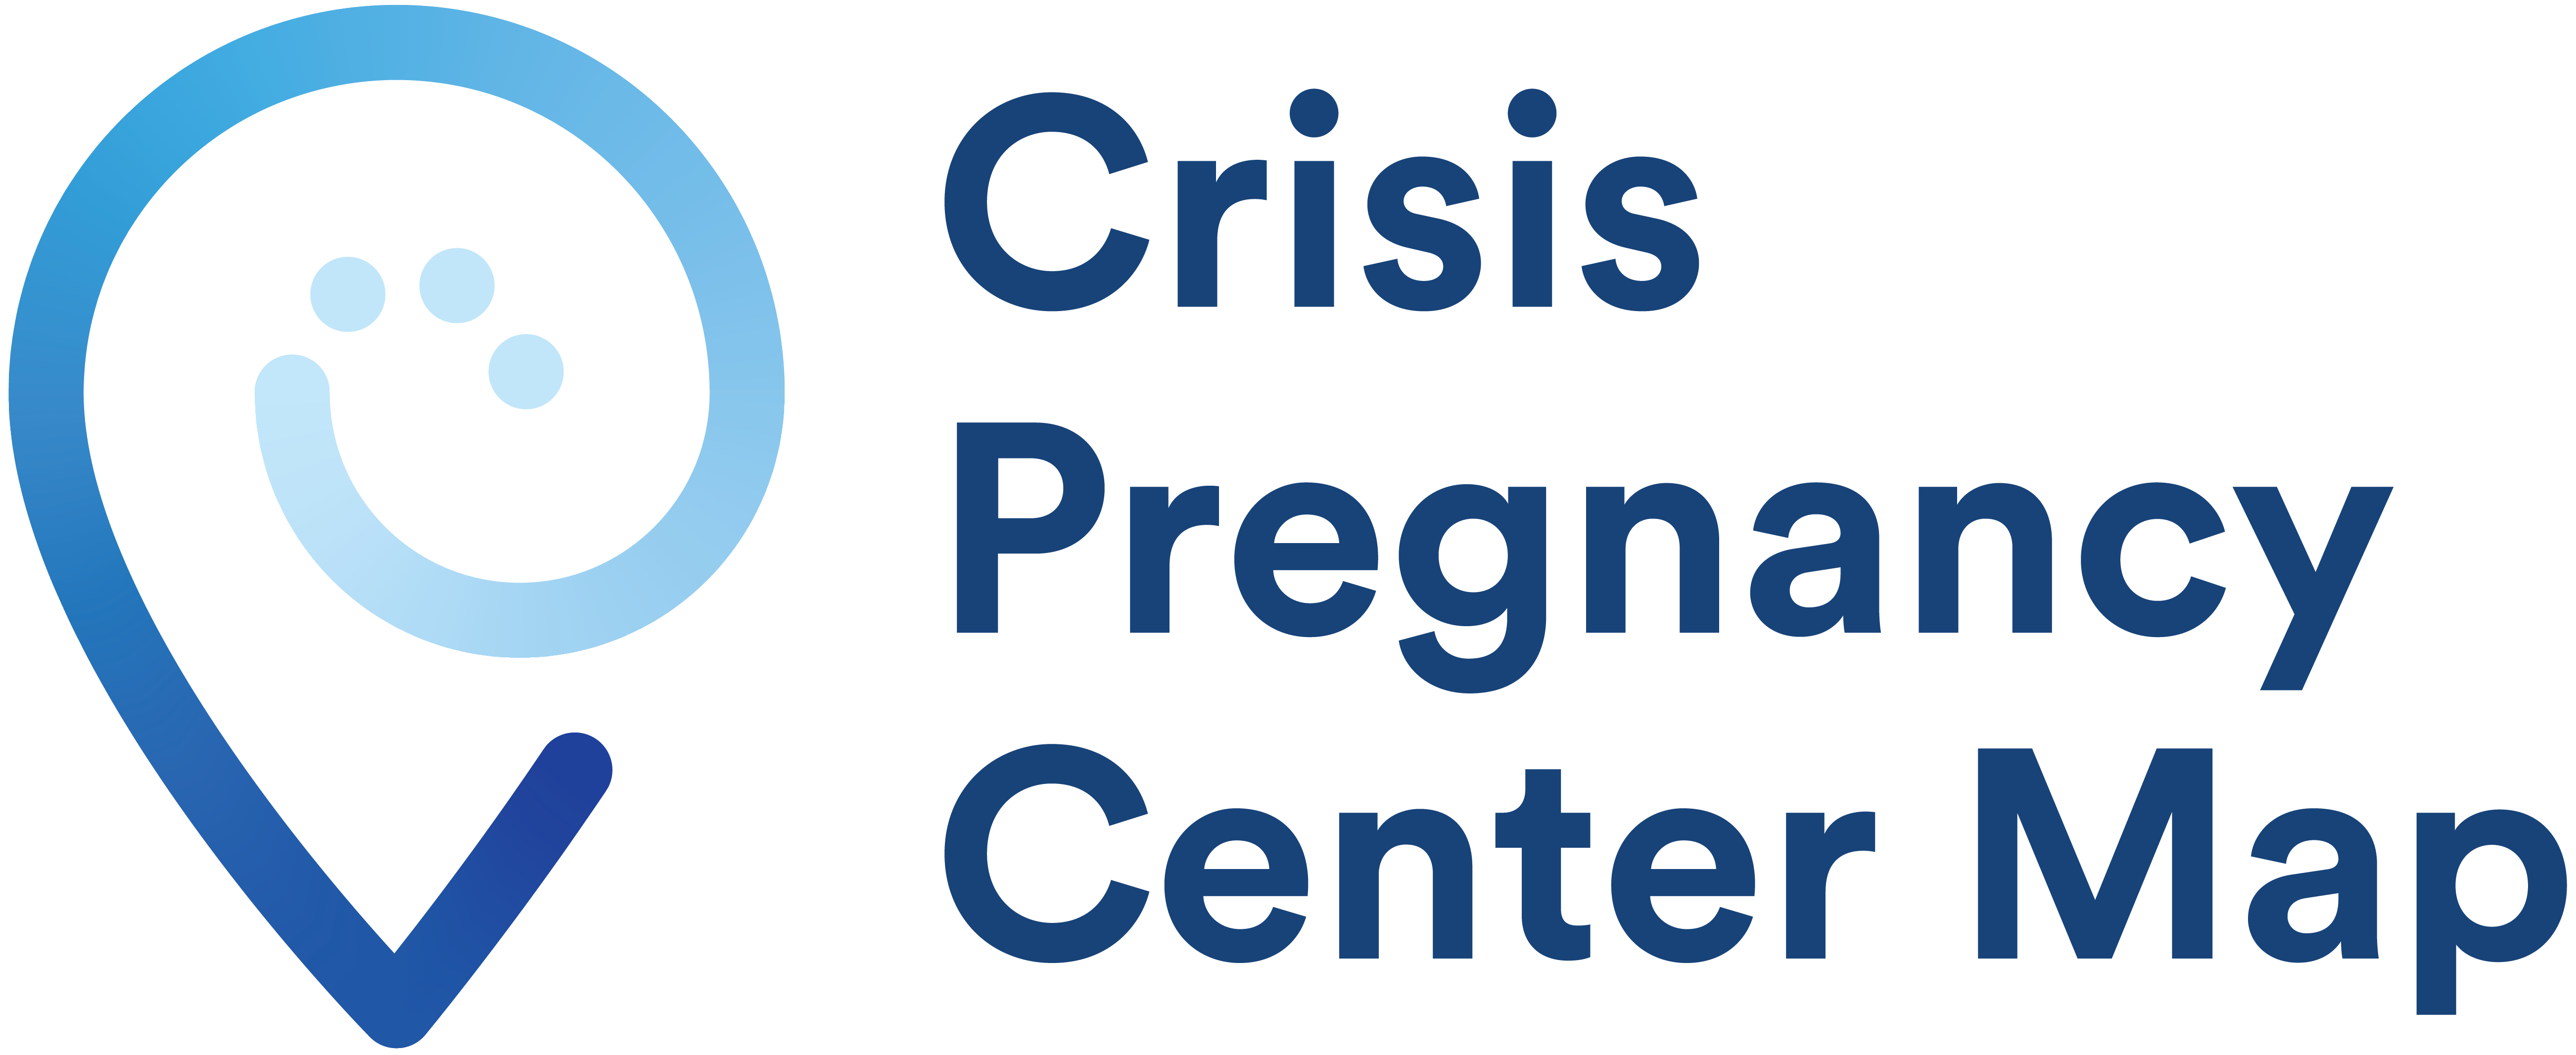 UGA researcher launches web-based directory to improve crisis pregnancy center transparency